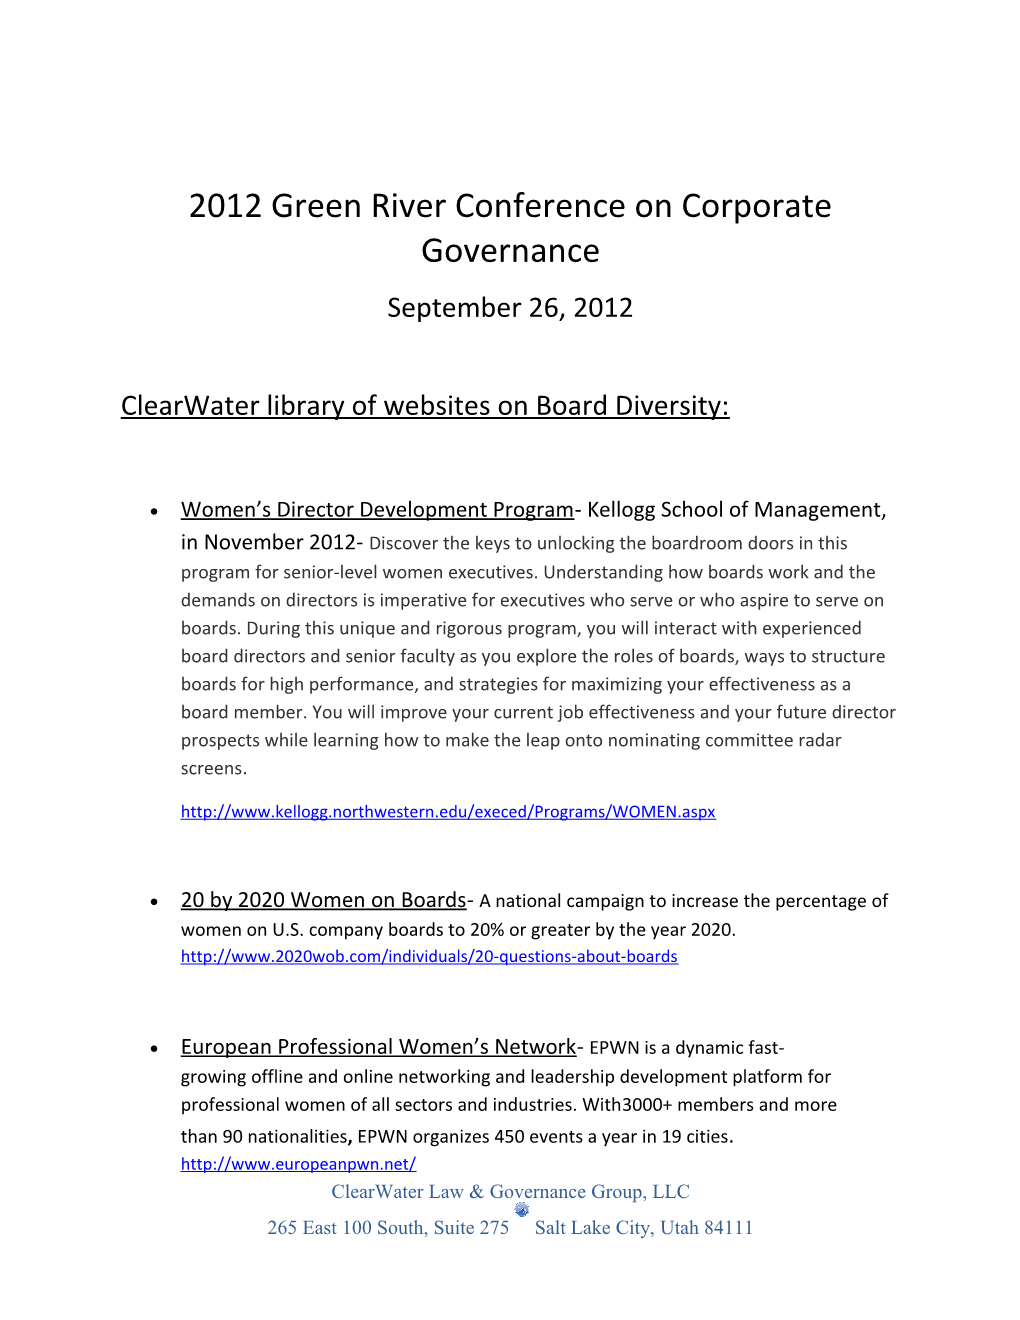 2012 Green River Conference on Corporate Governance